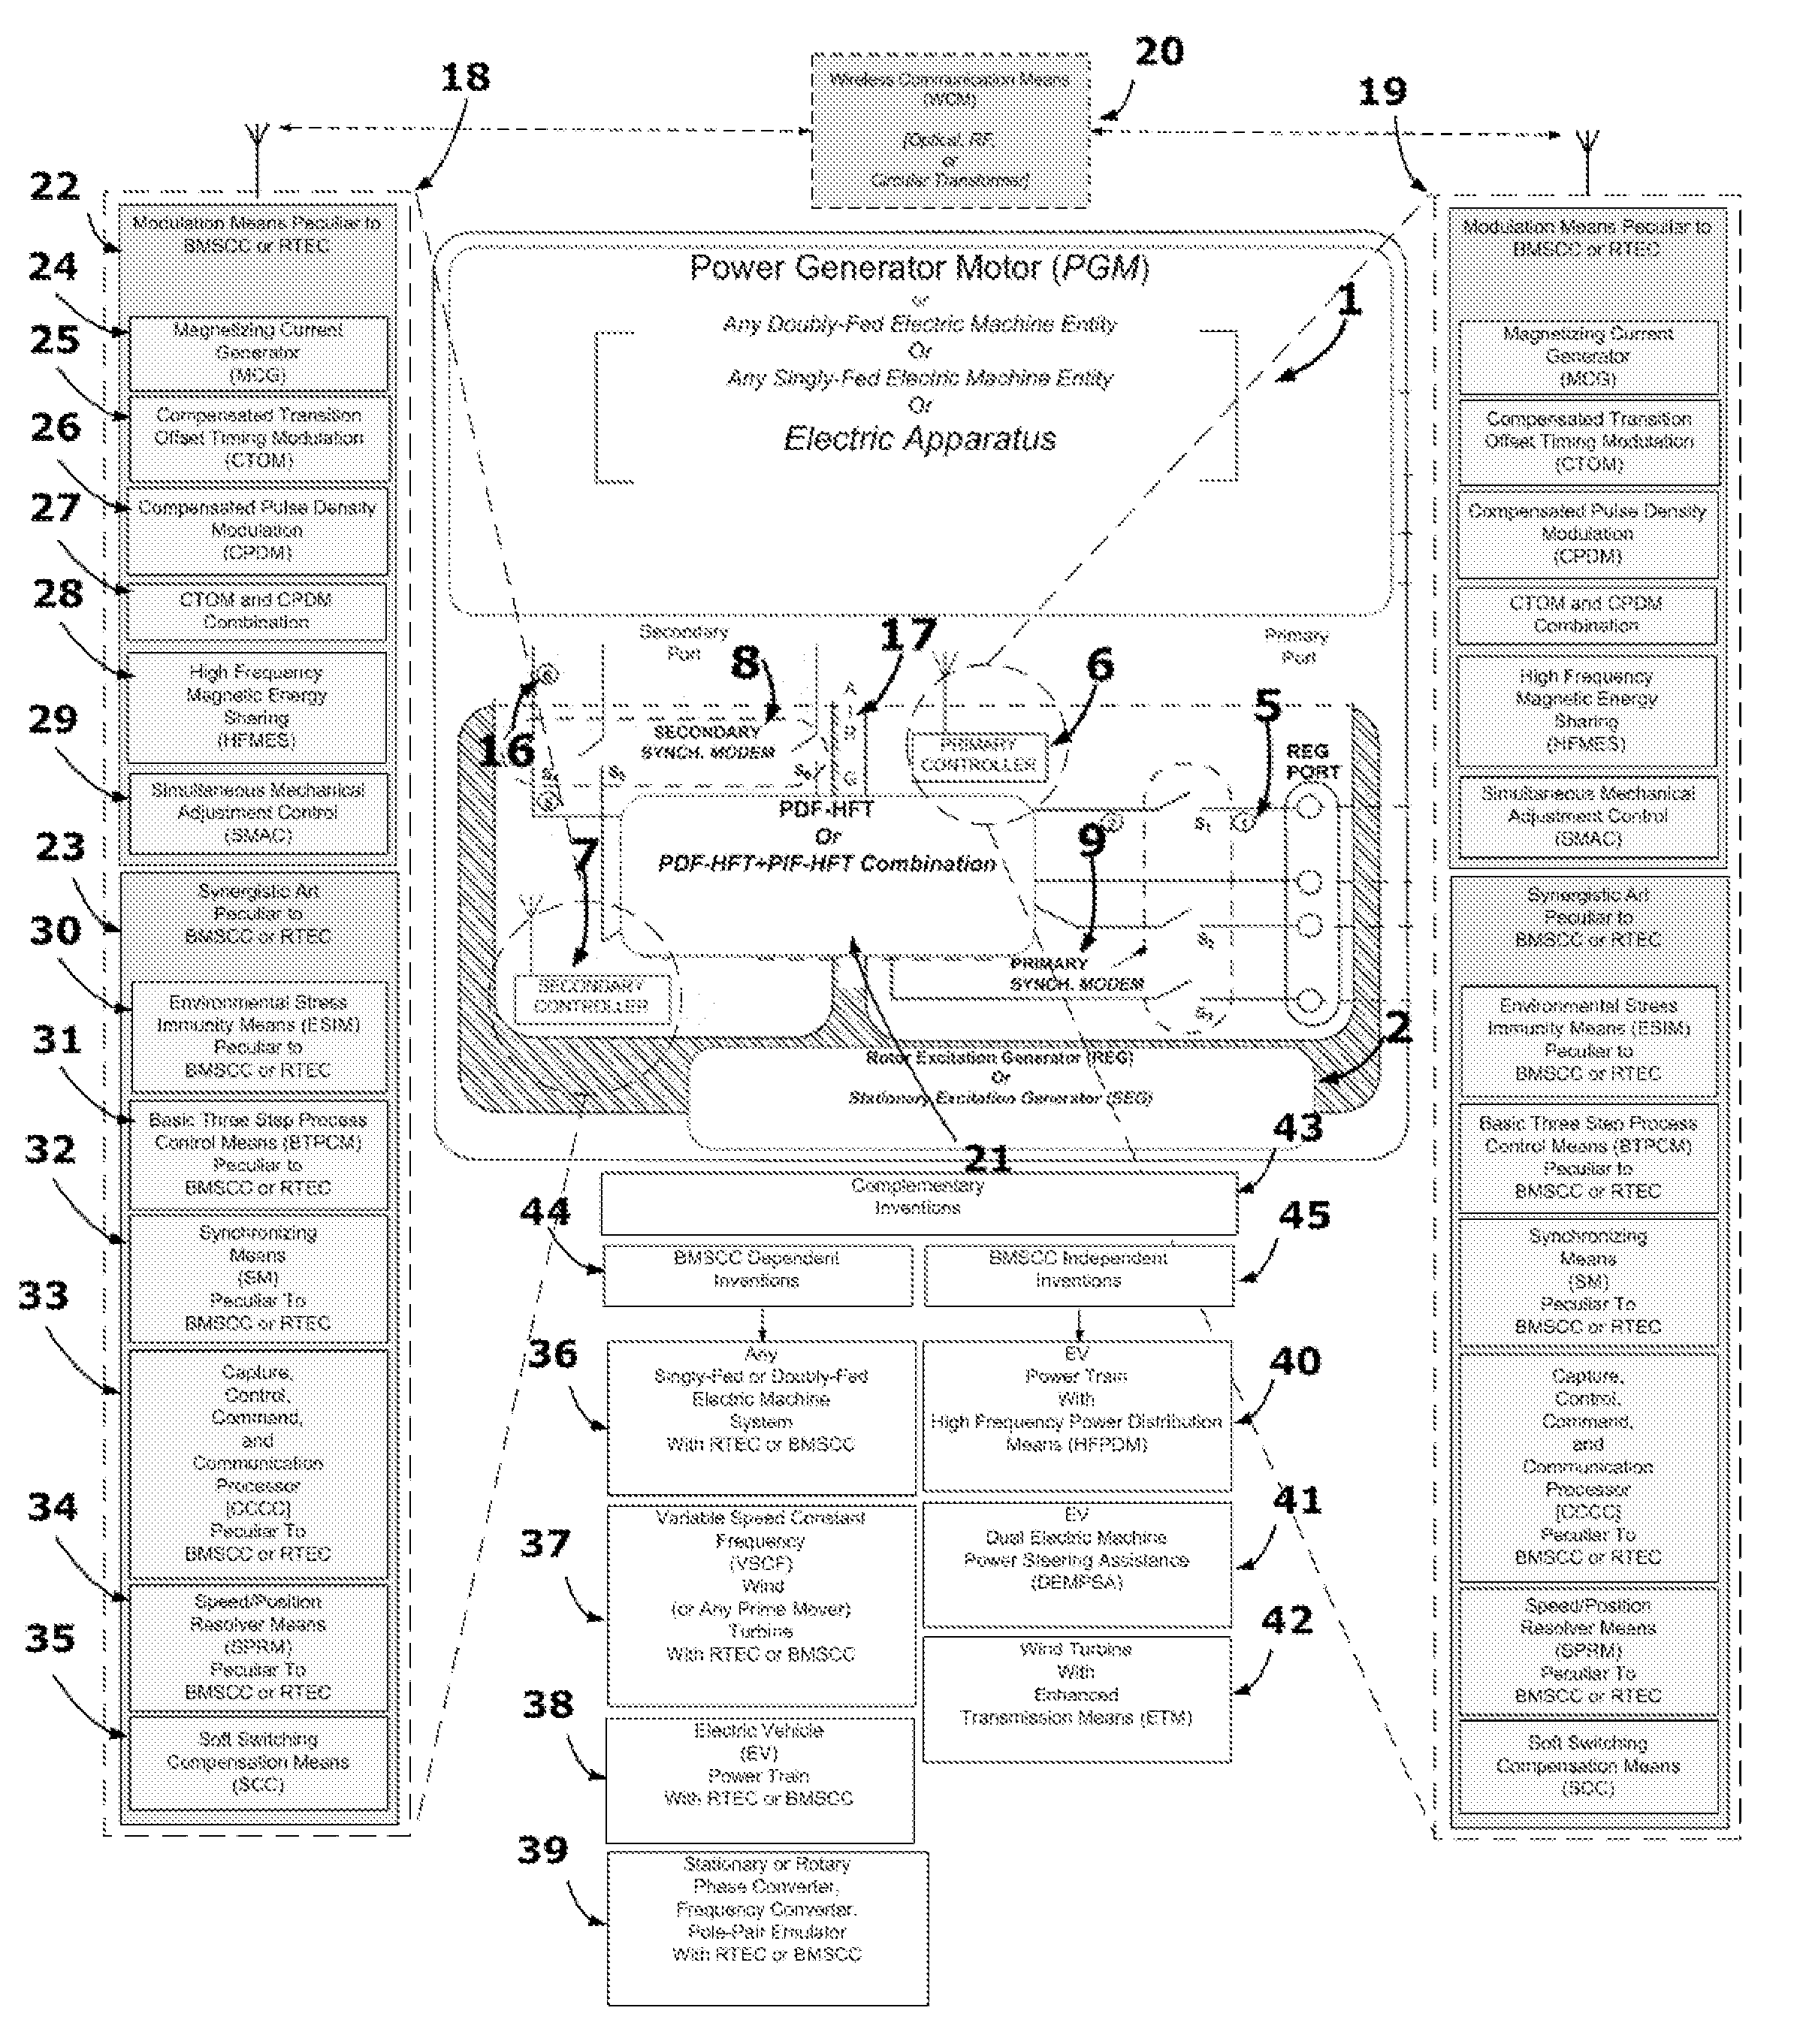 Brushless Multiphase Self-Commutation (or BMSCC) And Related Invention